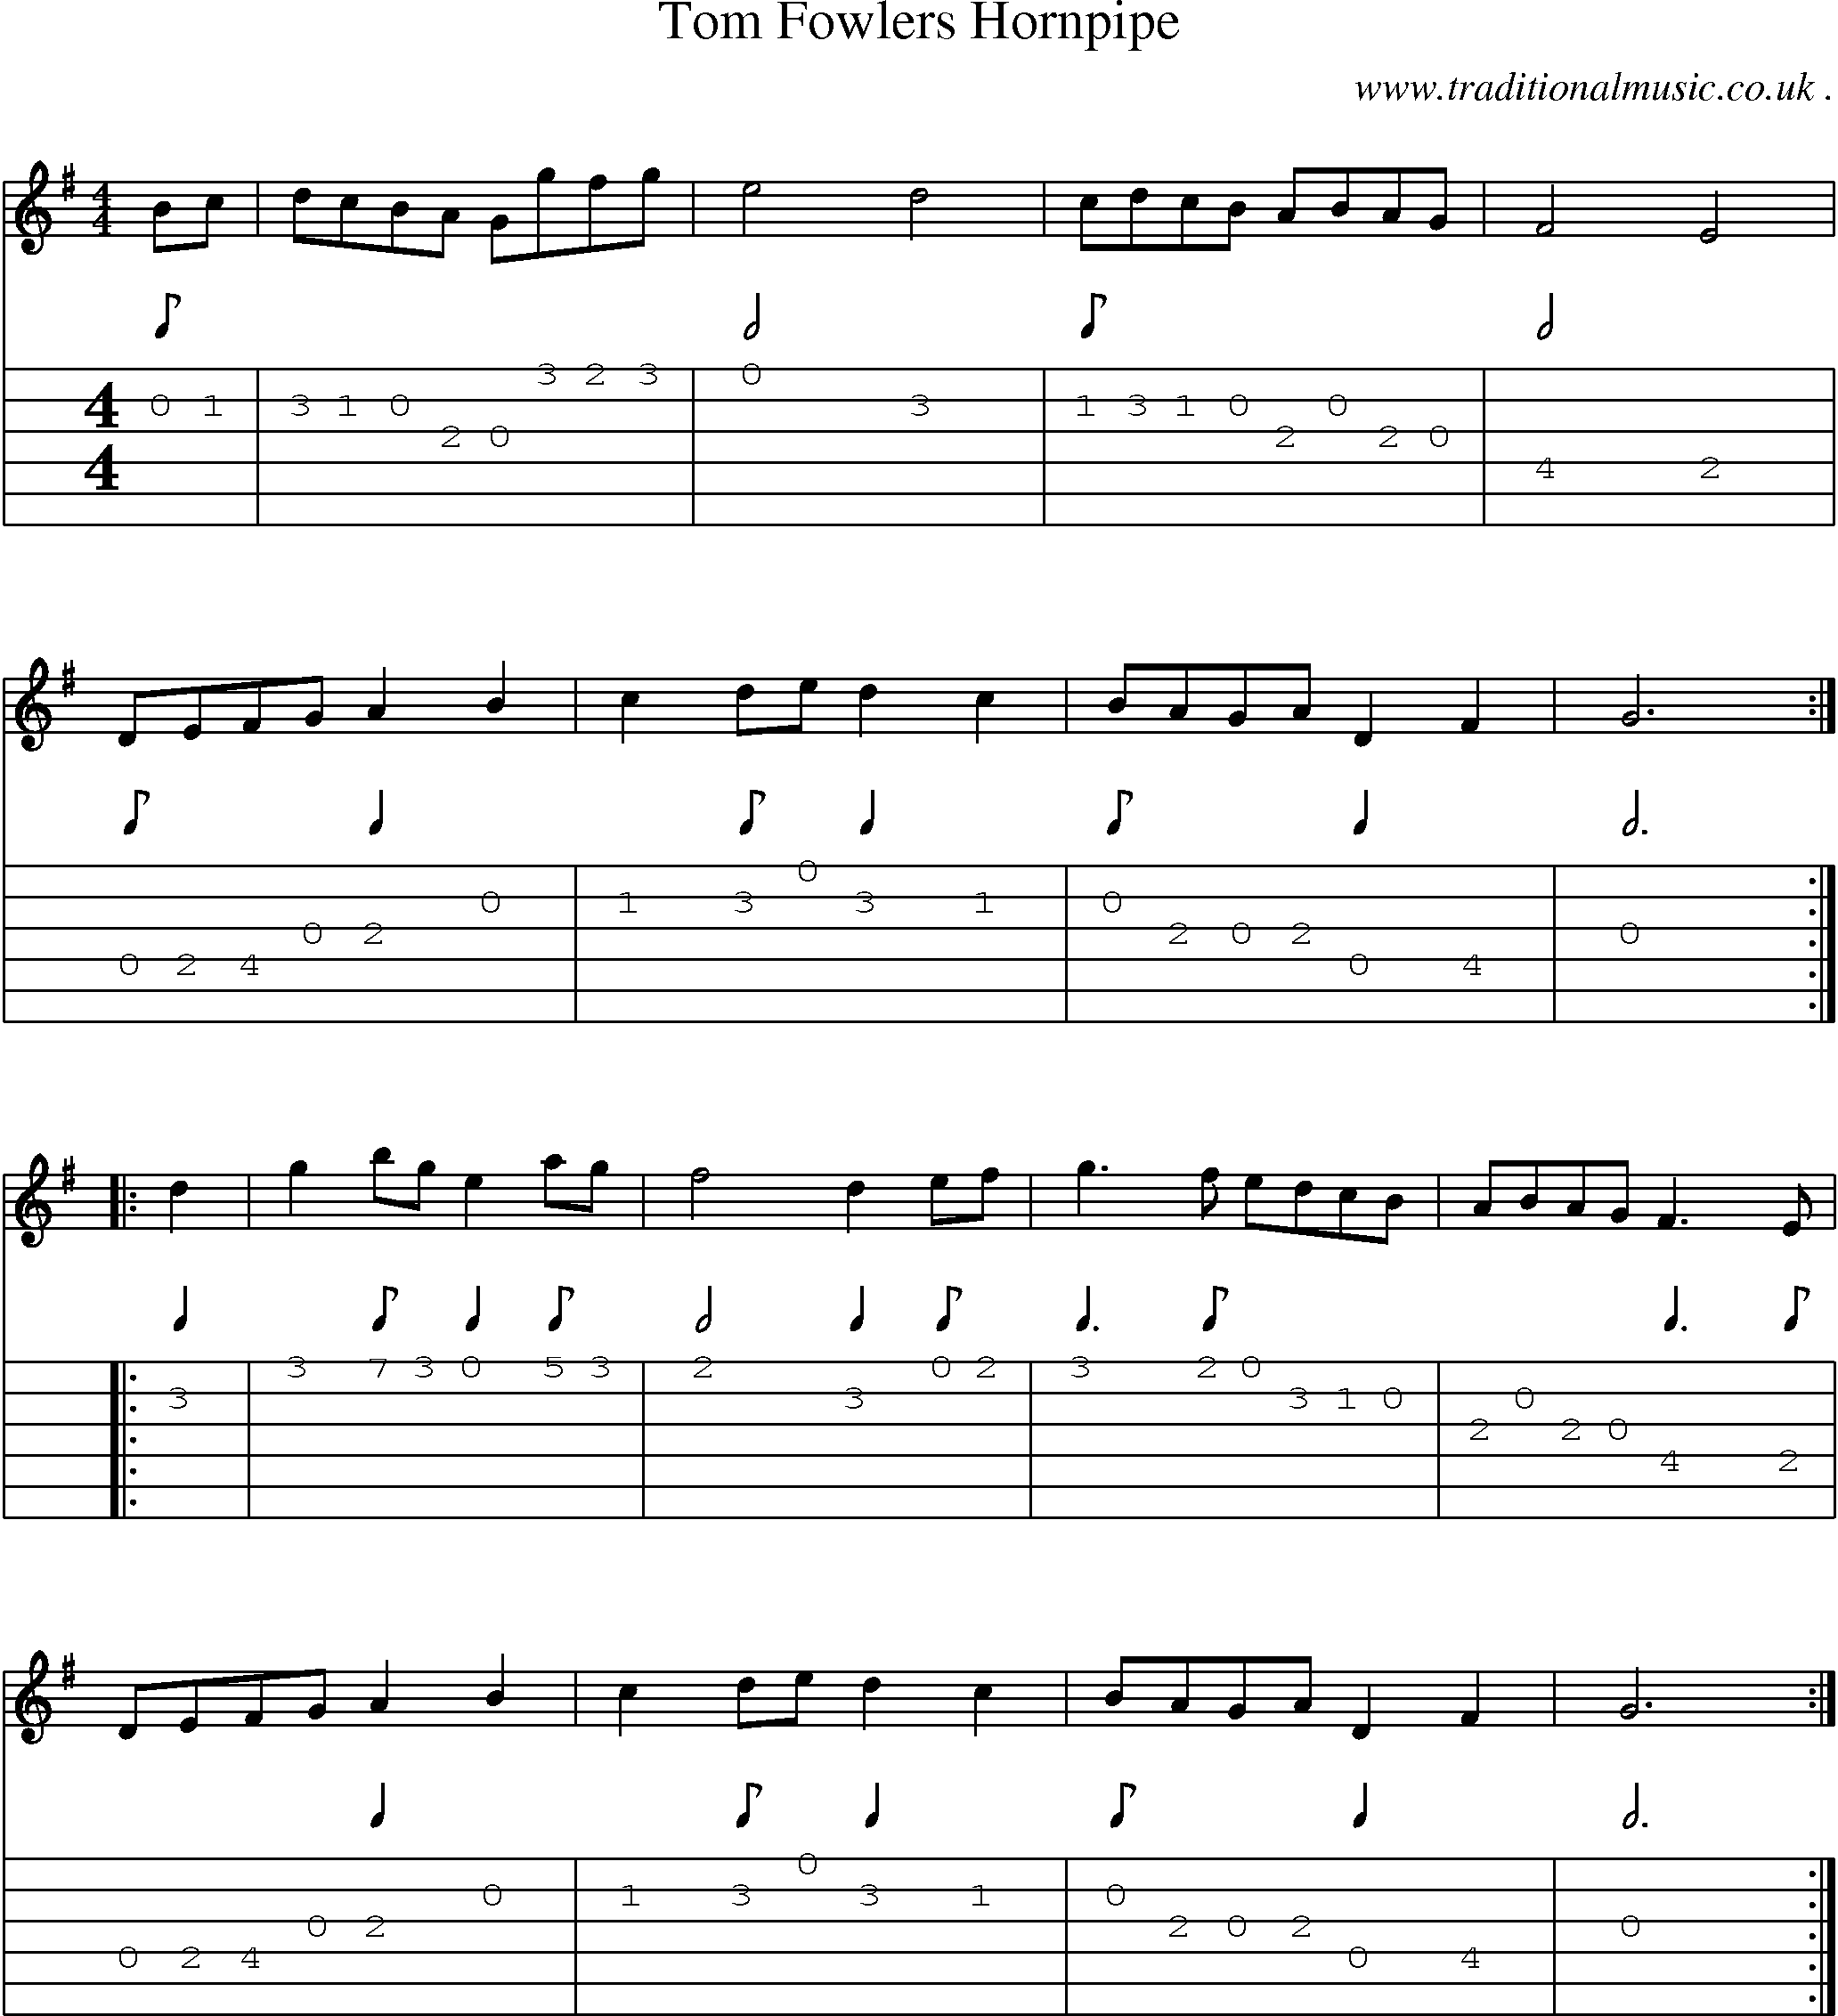 Sheet-Music and Guitar Tabs for Tom Fowlers Hornpipe